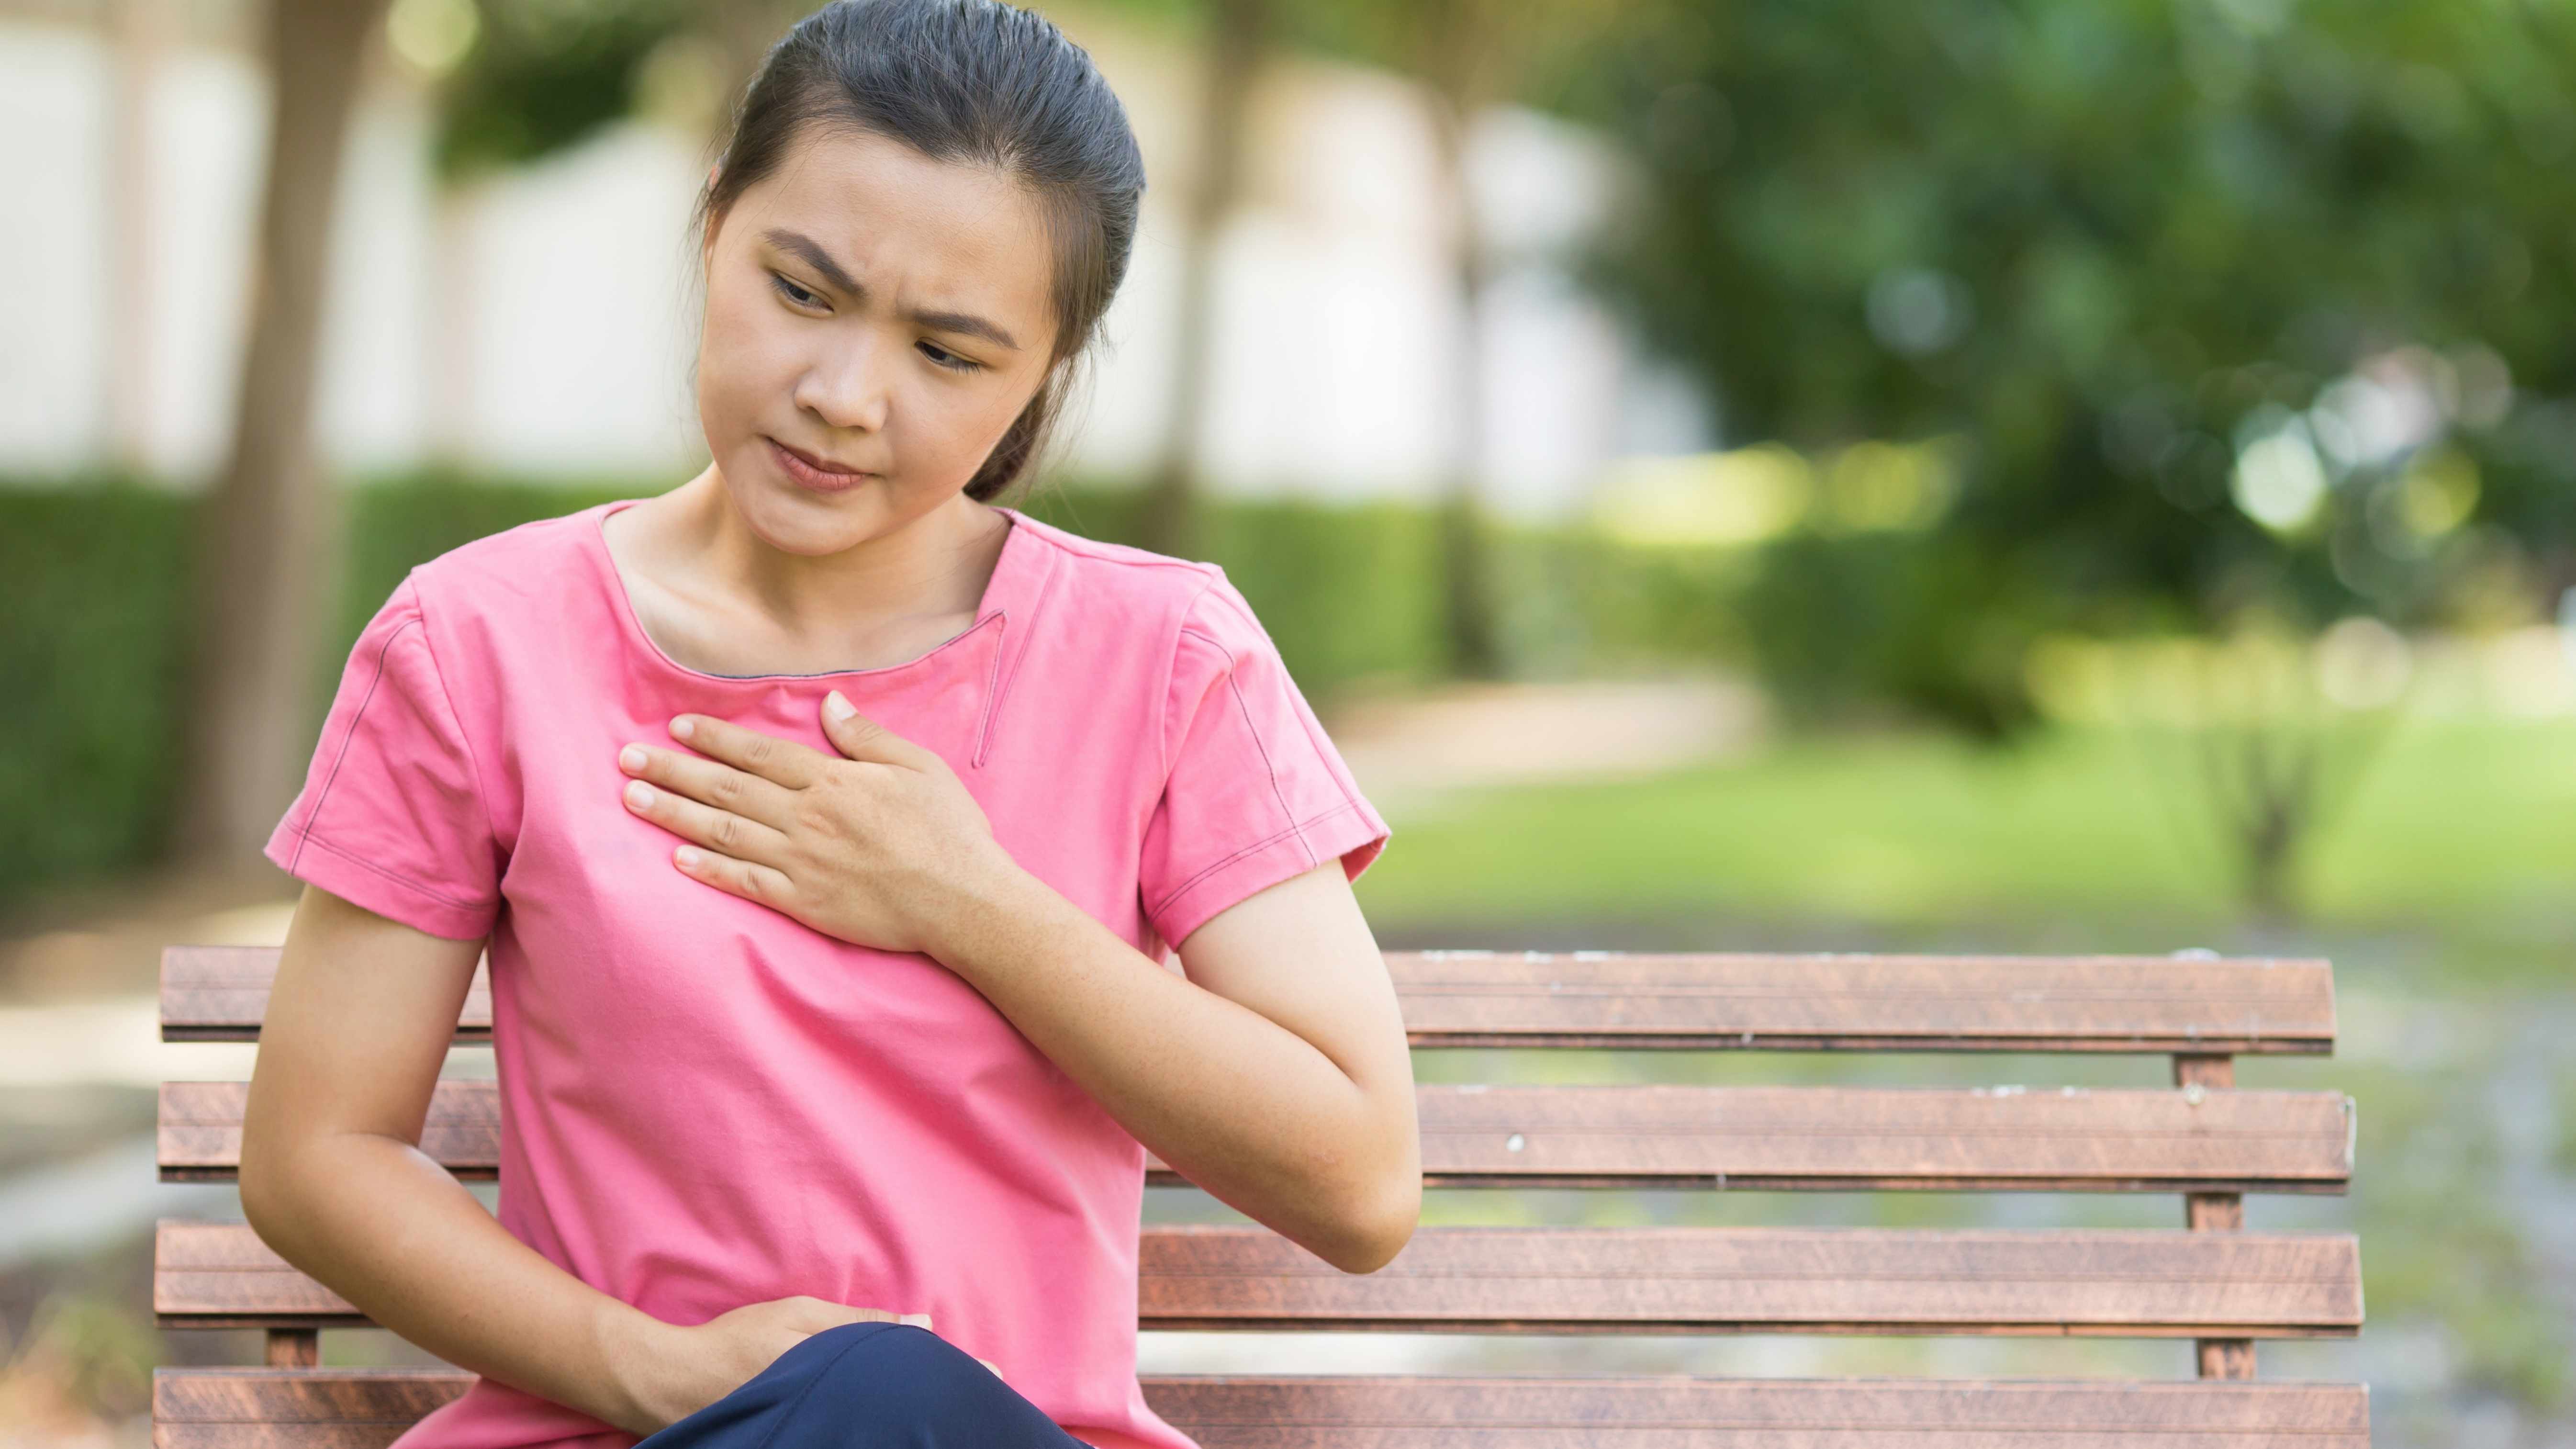 a young woman sitting on a park bench holding her chest because of heartburn or discomfort